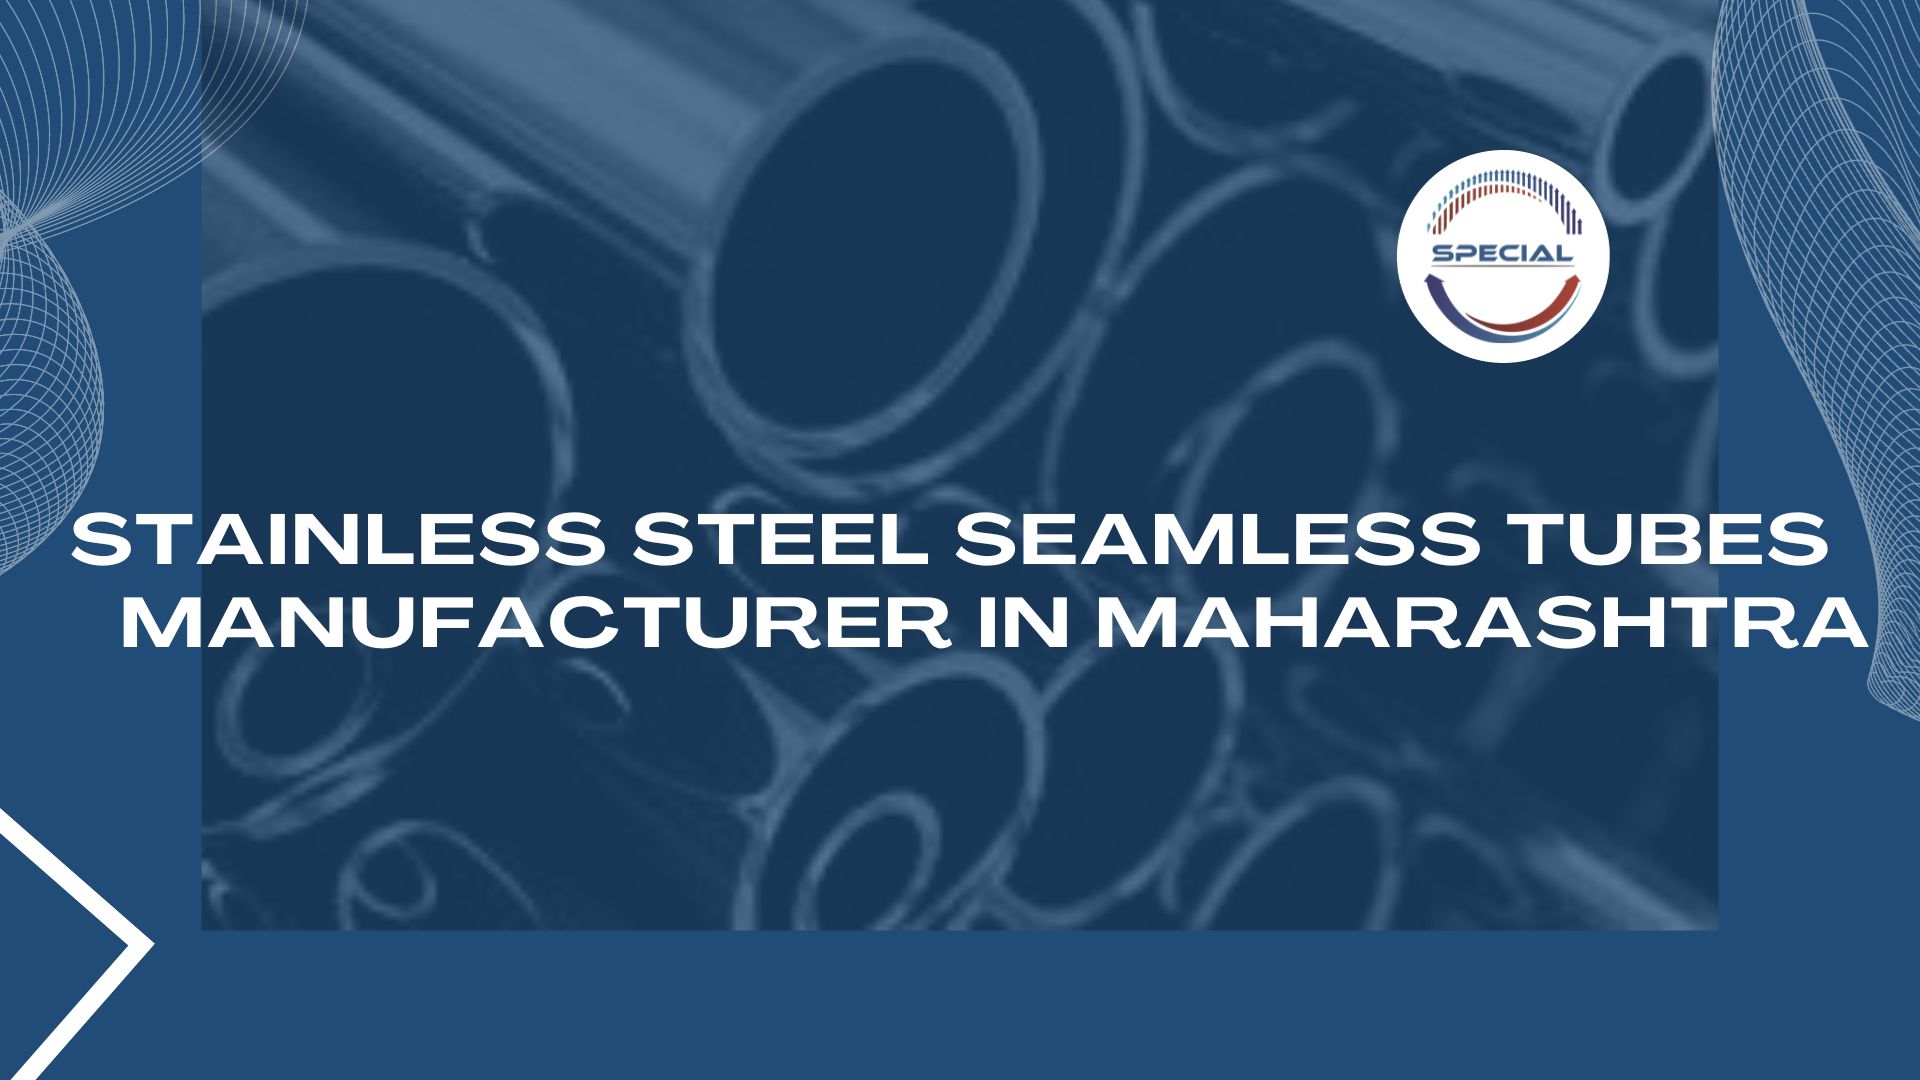 Stainless Steel Seamless Tubes Manufacturer in Maharashtra